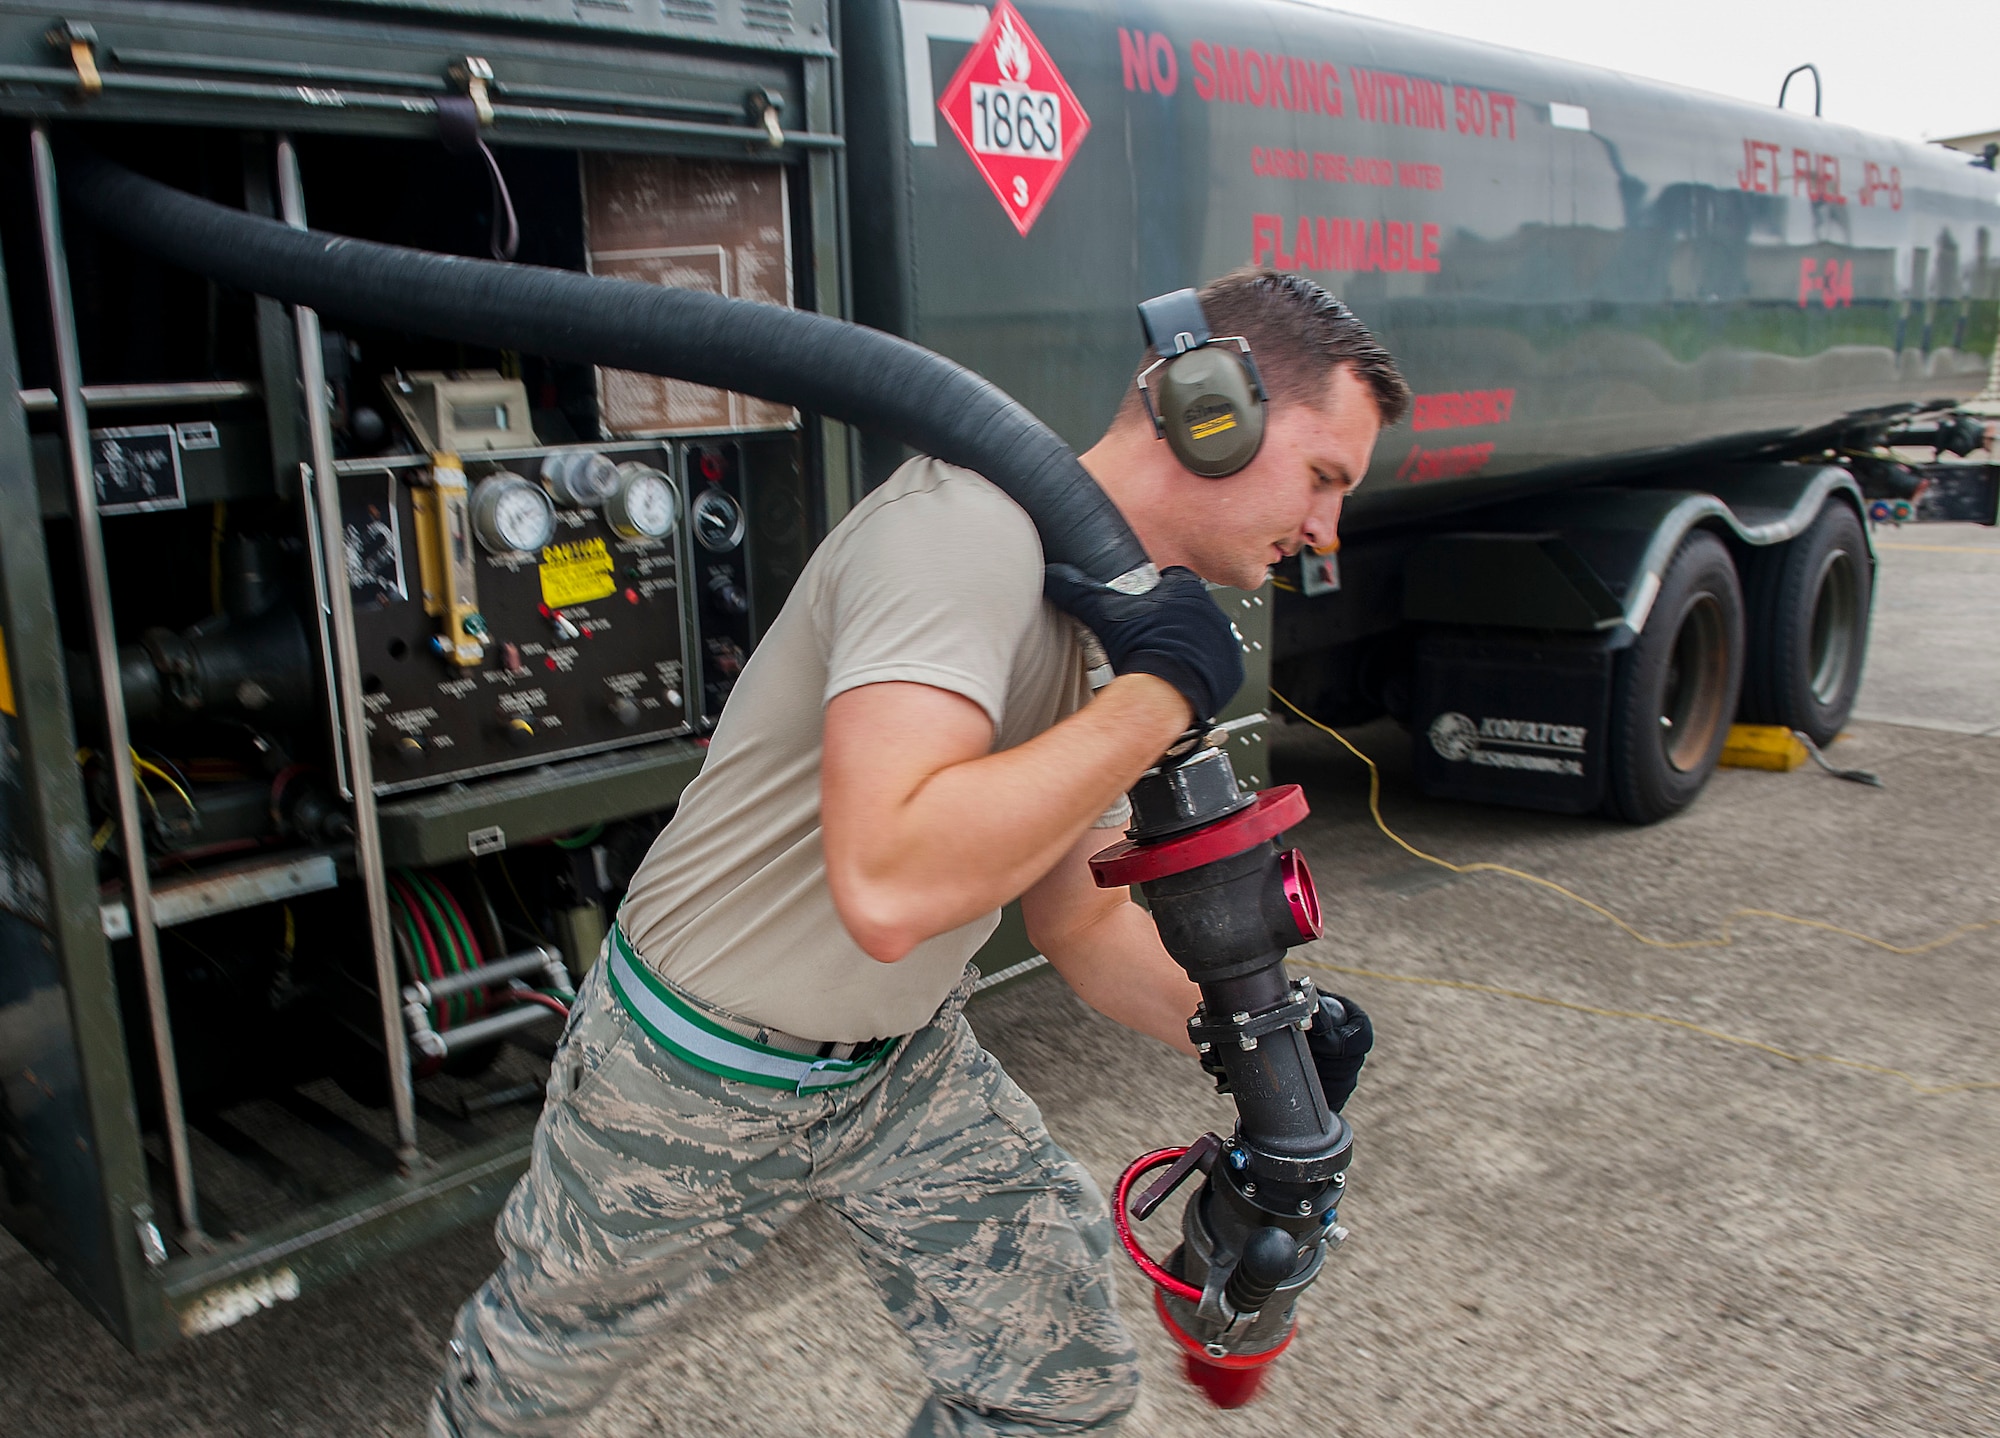 Airman 1st Class Terry Gilman, an 18th Logistics Readiness Squadron fuels distribution operator, pulls out a hose to refuel an aircraft April 13, 2016, at Kadena Air Base, Japan. Petroleum, oil and lubricant Airmen fuel the fight and are vital in keeping aircraft ready to go. (U.S. Air Force photo/Airman 1st Class Corey M. Pettis)